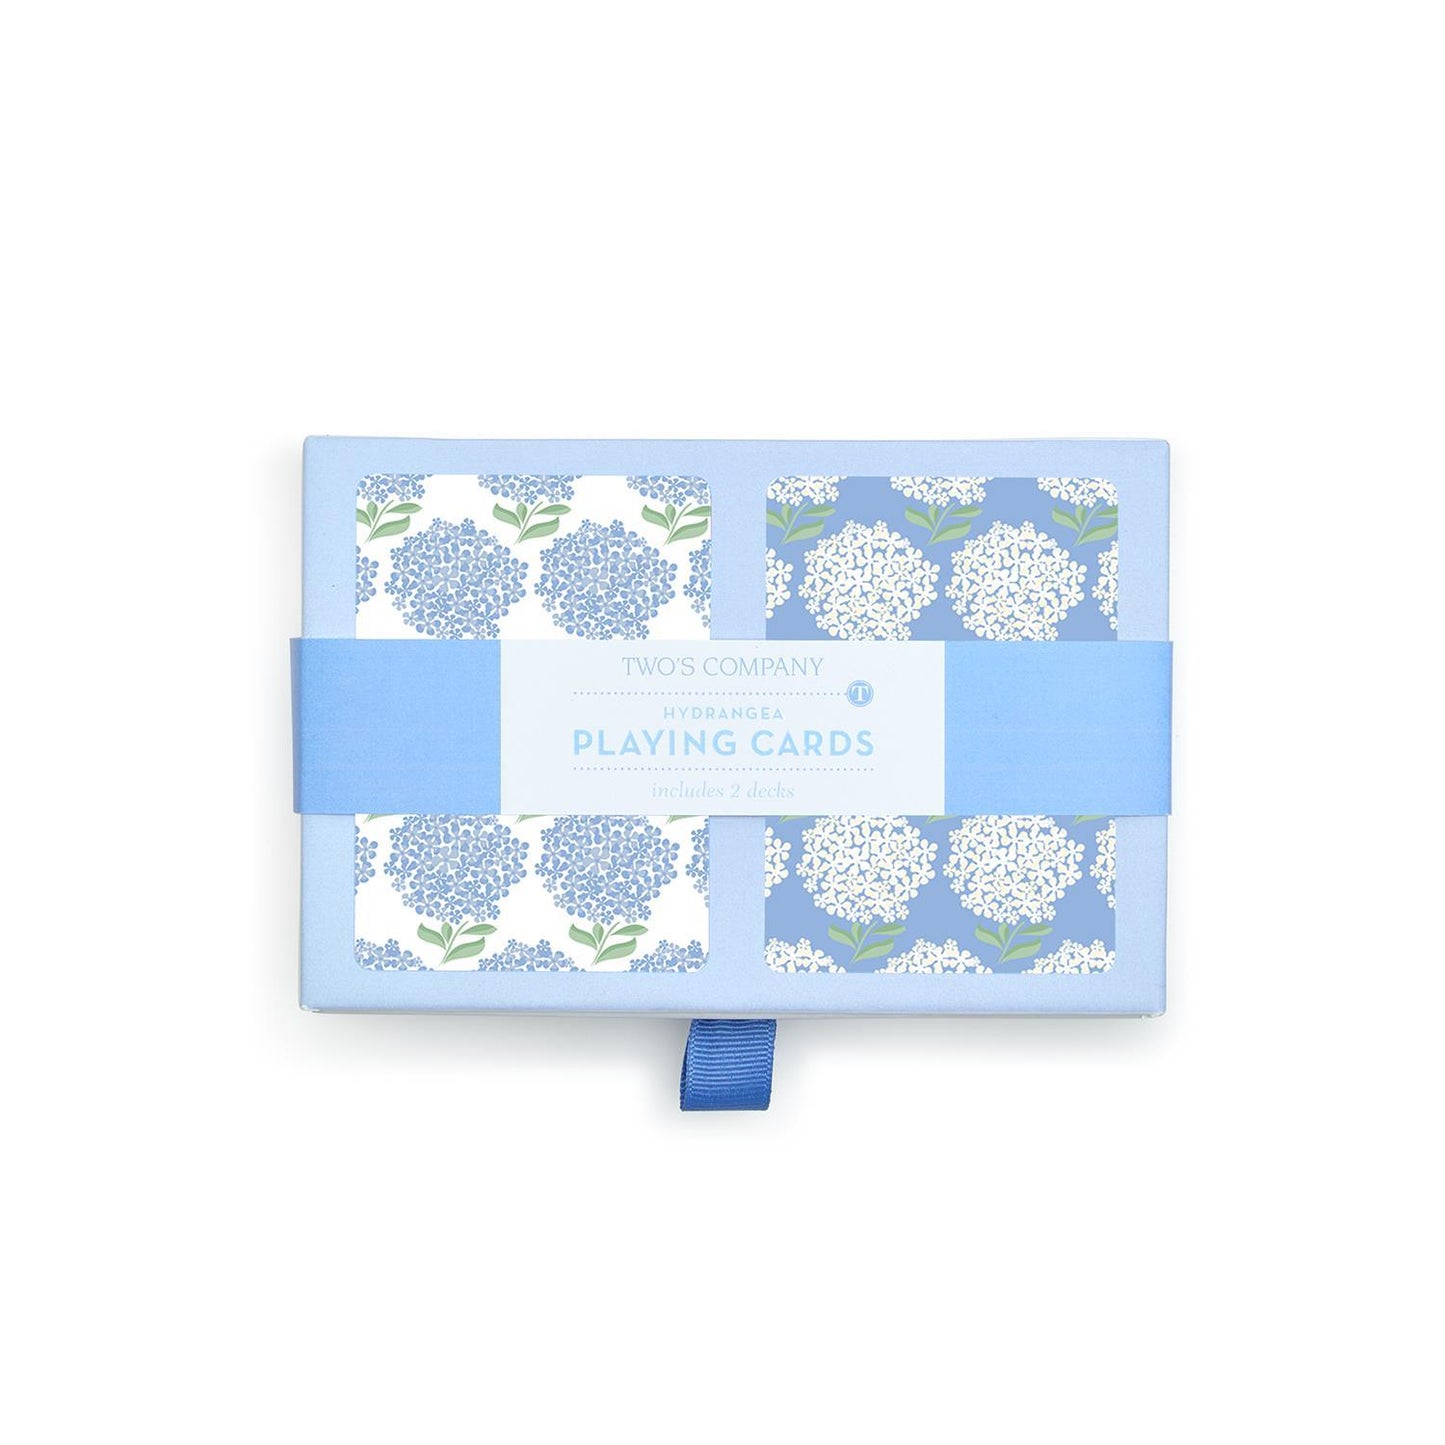 Hydrangea Double Deck Playing Cards in Gift Box